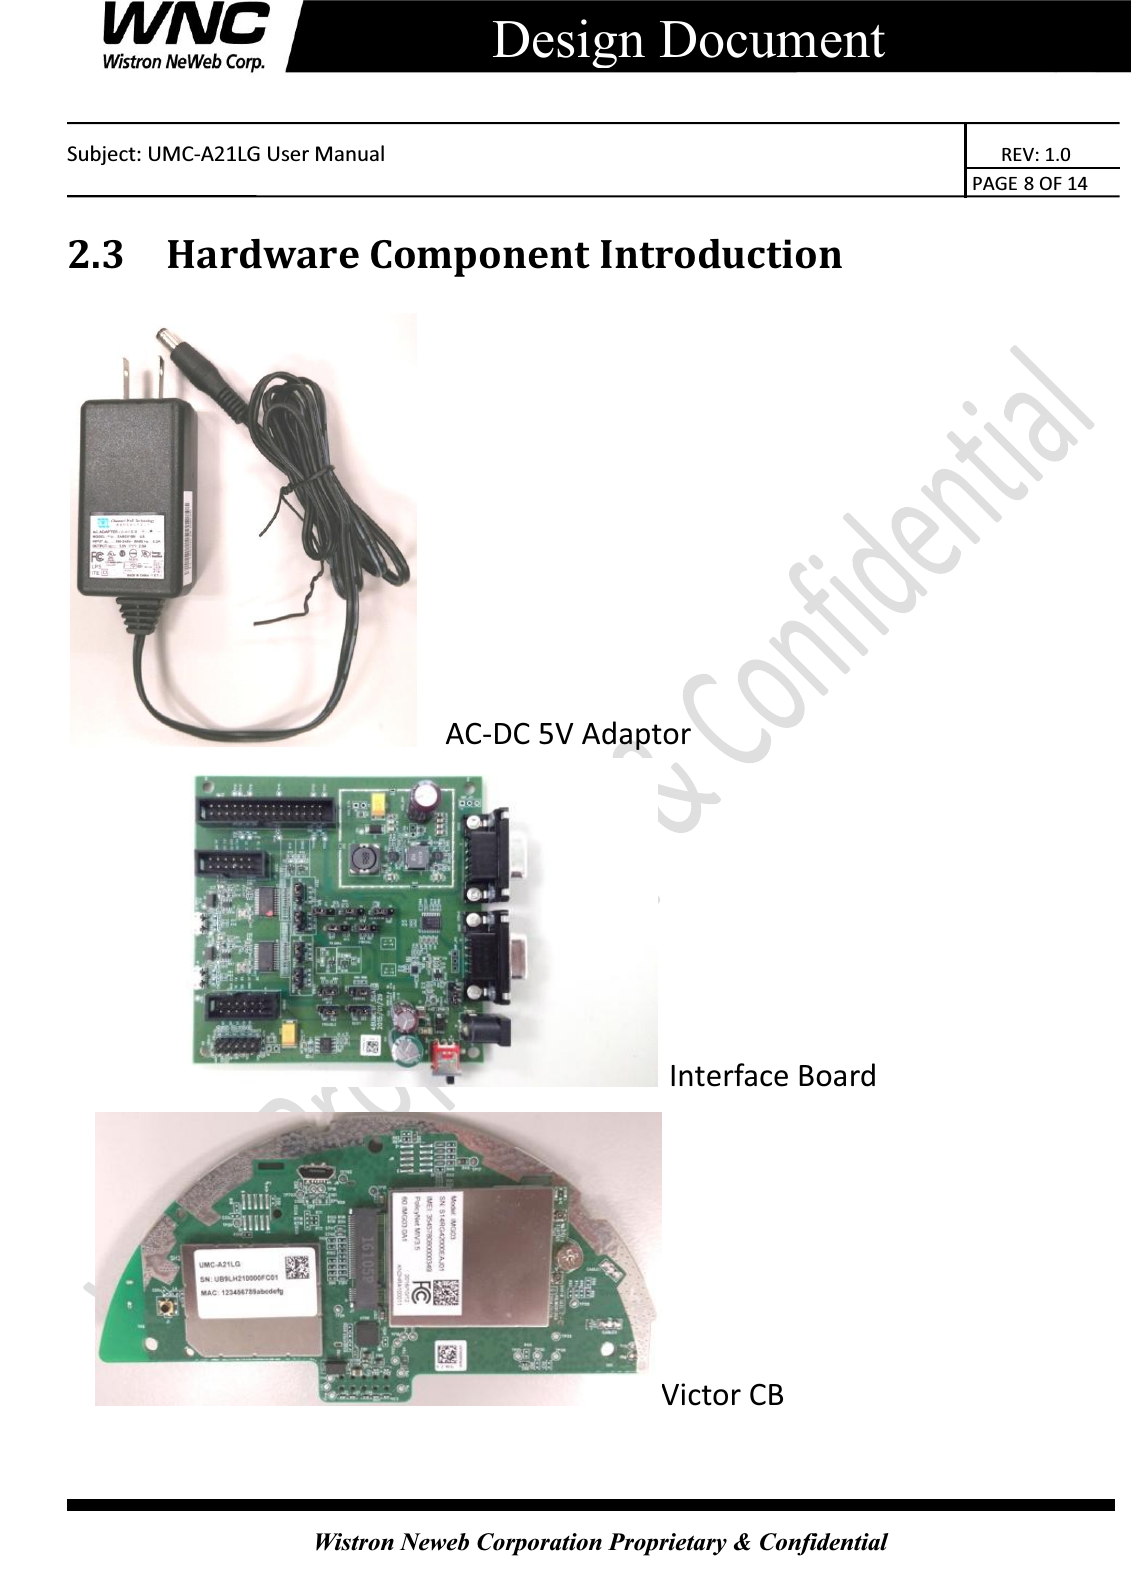    Subject: UMC-A21LG User Manual                                                          REV: 1.0                                                                                        PAGE 8 OF 14  Wistron Neweb Corporation Proprietary &amp; Confidential     Design Document 2.3 Hardware Component Introduction   AC-DC 5V Adaptor  Interface Board    Victor CB  